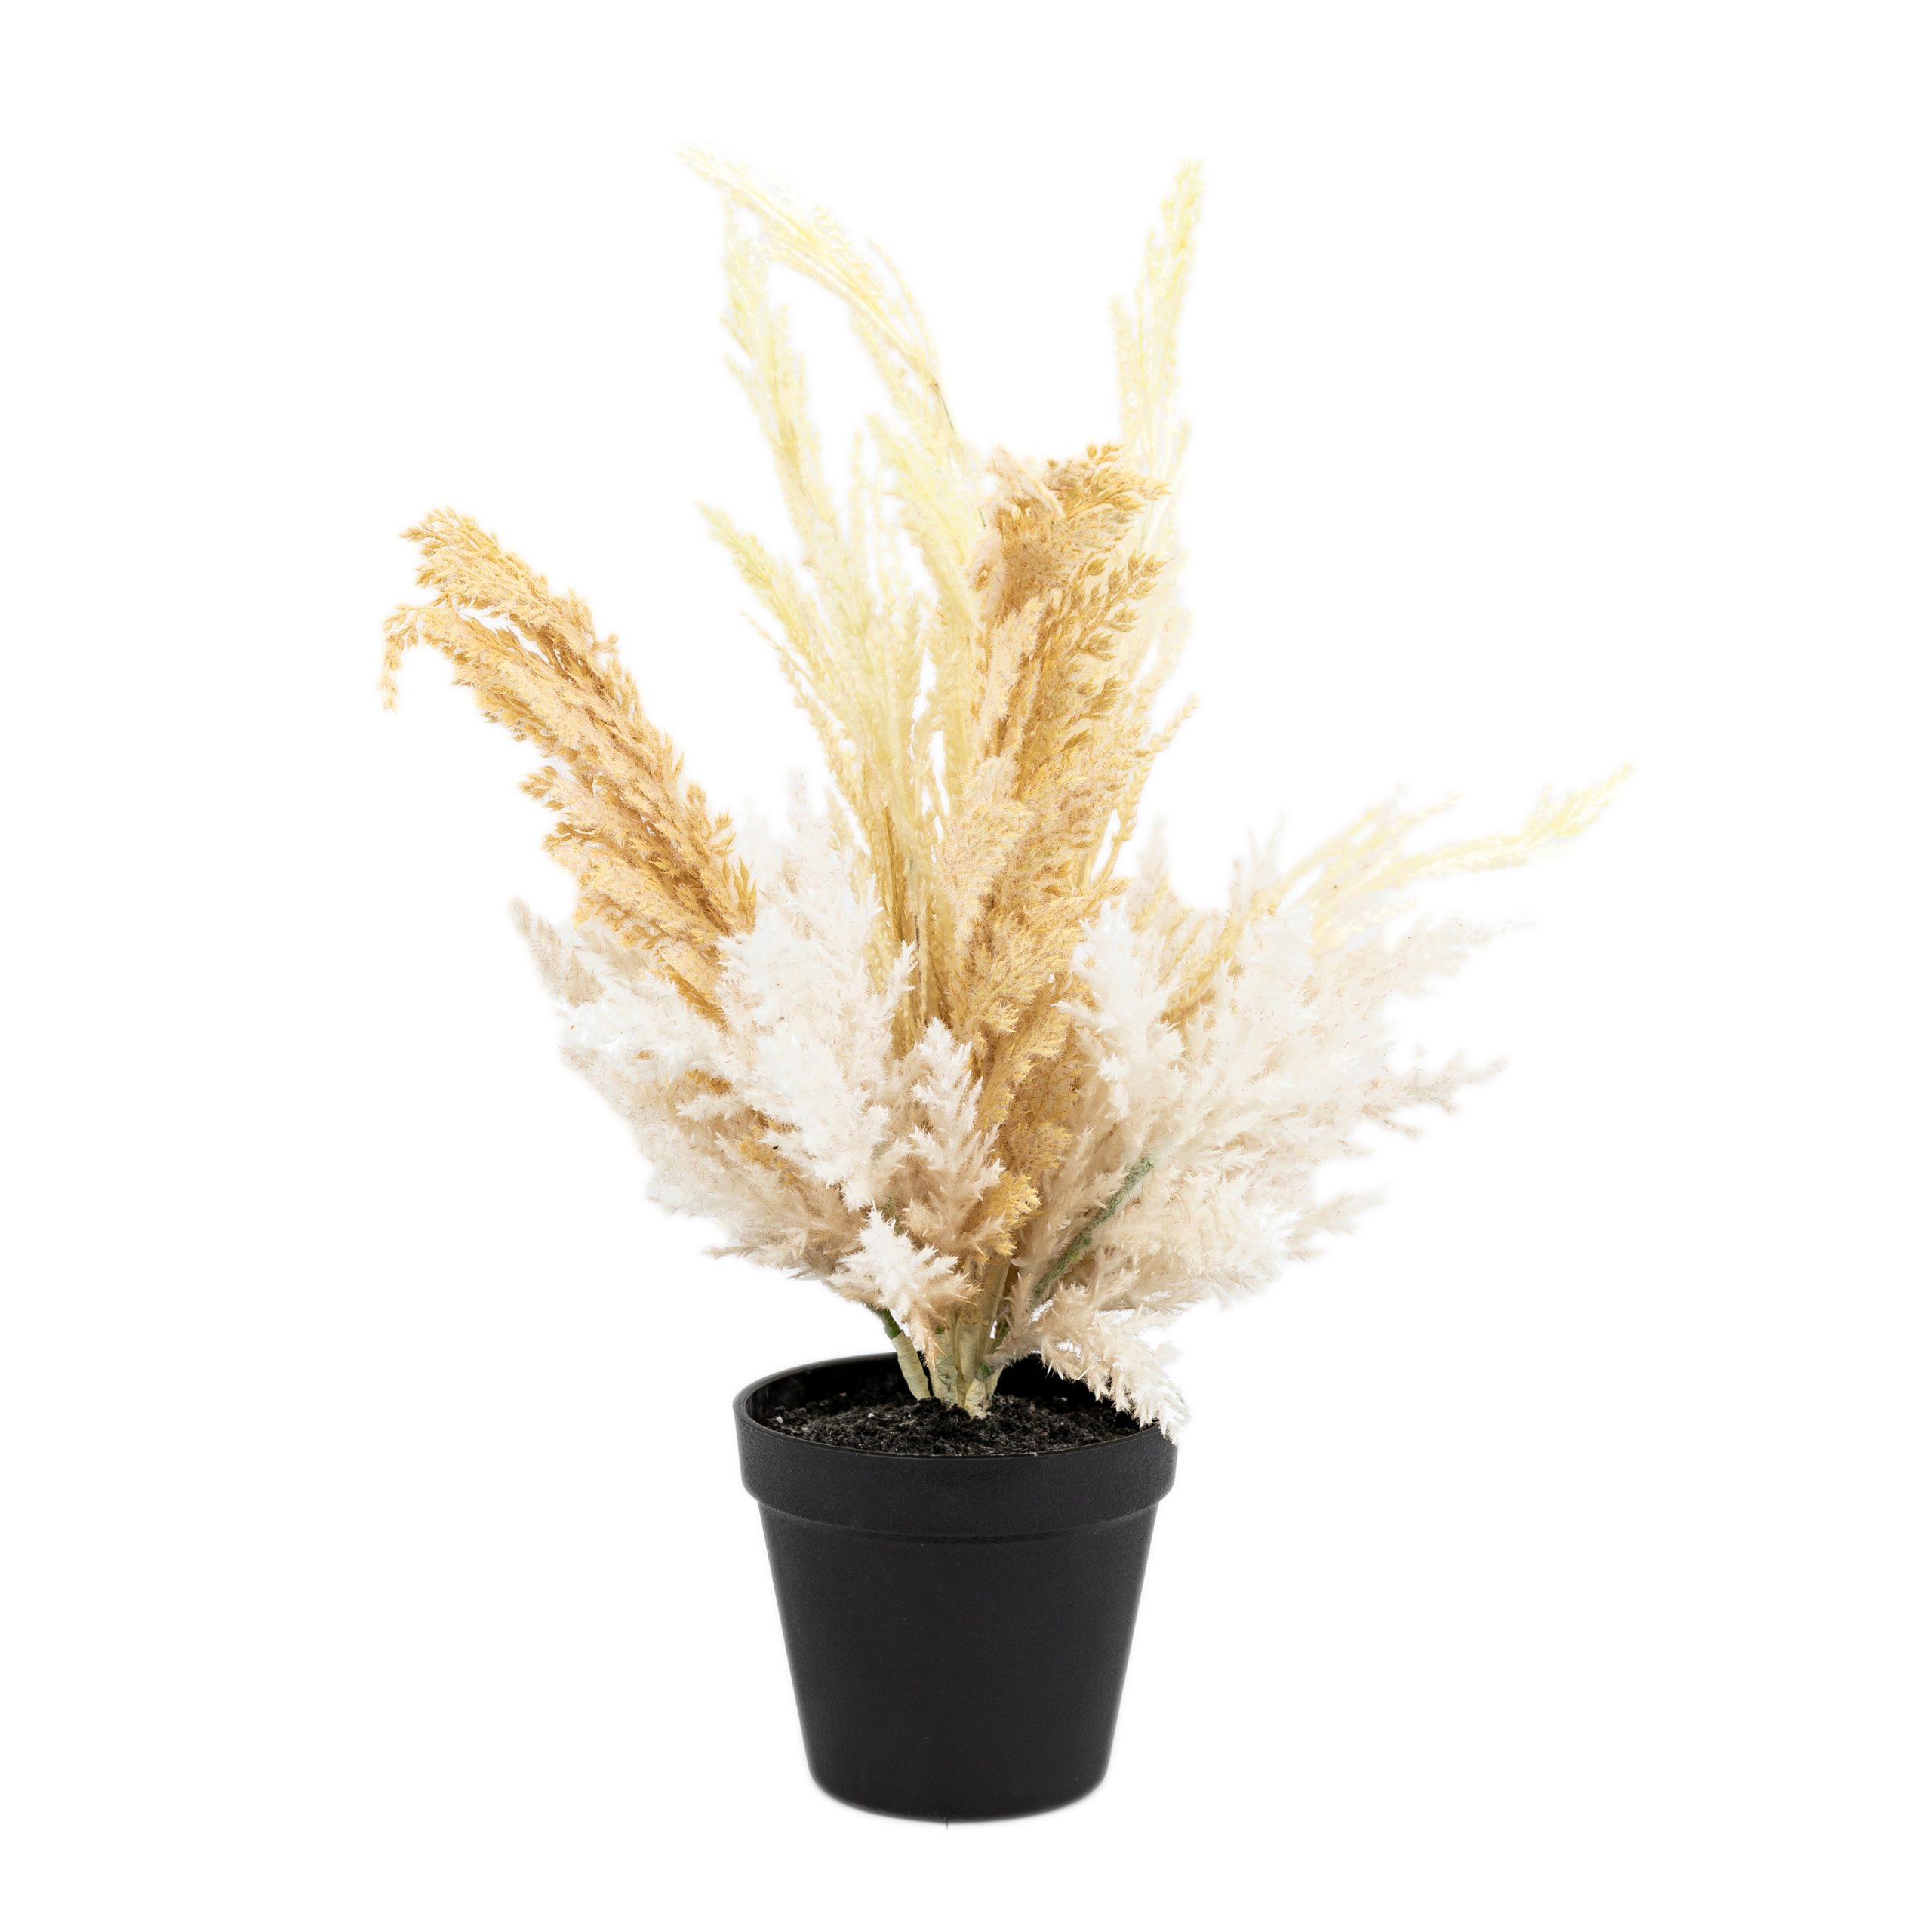 Gallery Direct Potted Dry Grass Mix